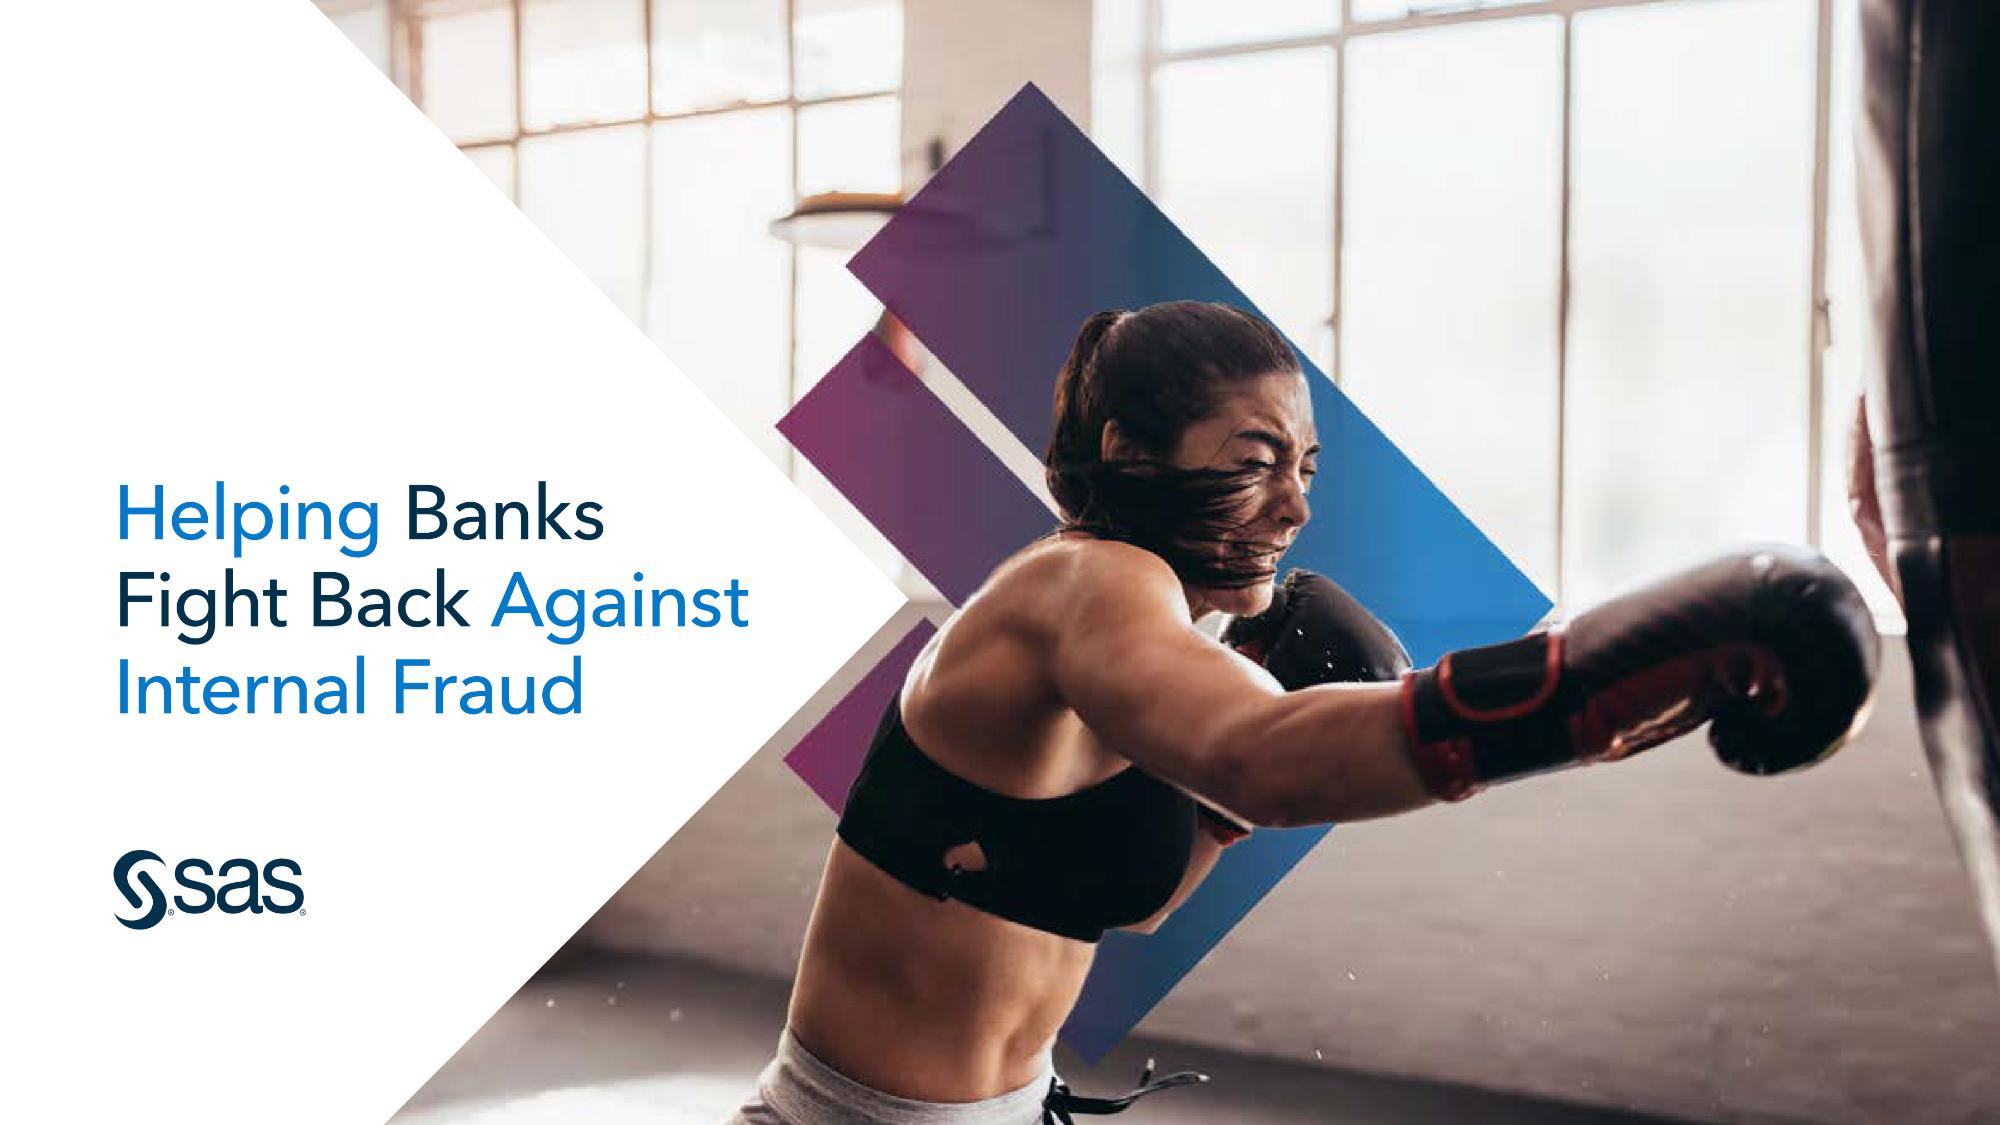 Helping Banks Fight Back Against Internal Fraud